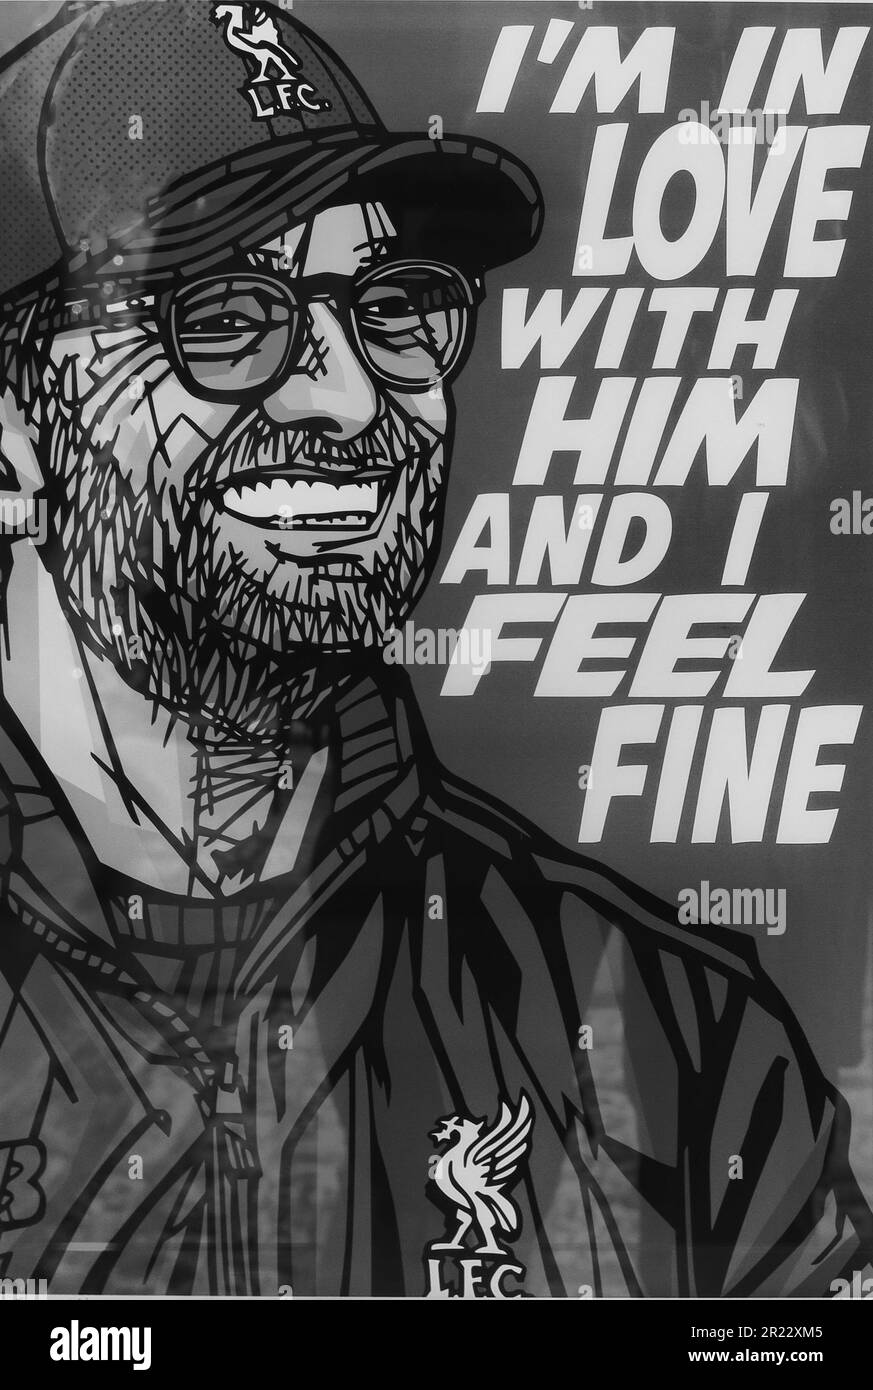 Klopp the Mainzer, LFC Liverpool Football Club manager sketch art - I'm in love with him and I feel fine - Beatles lyric from I feel fine Stock Photo